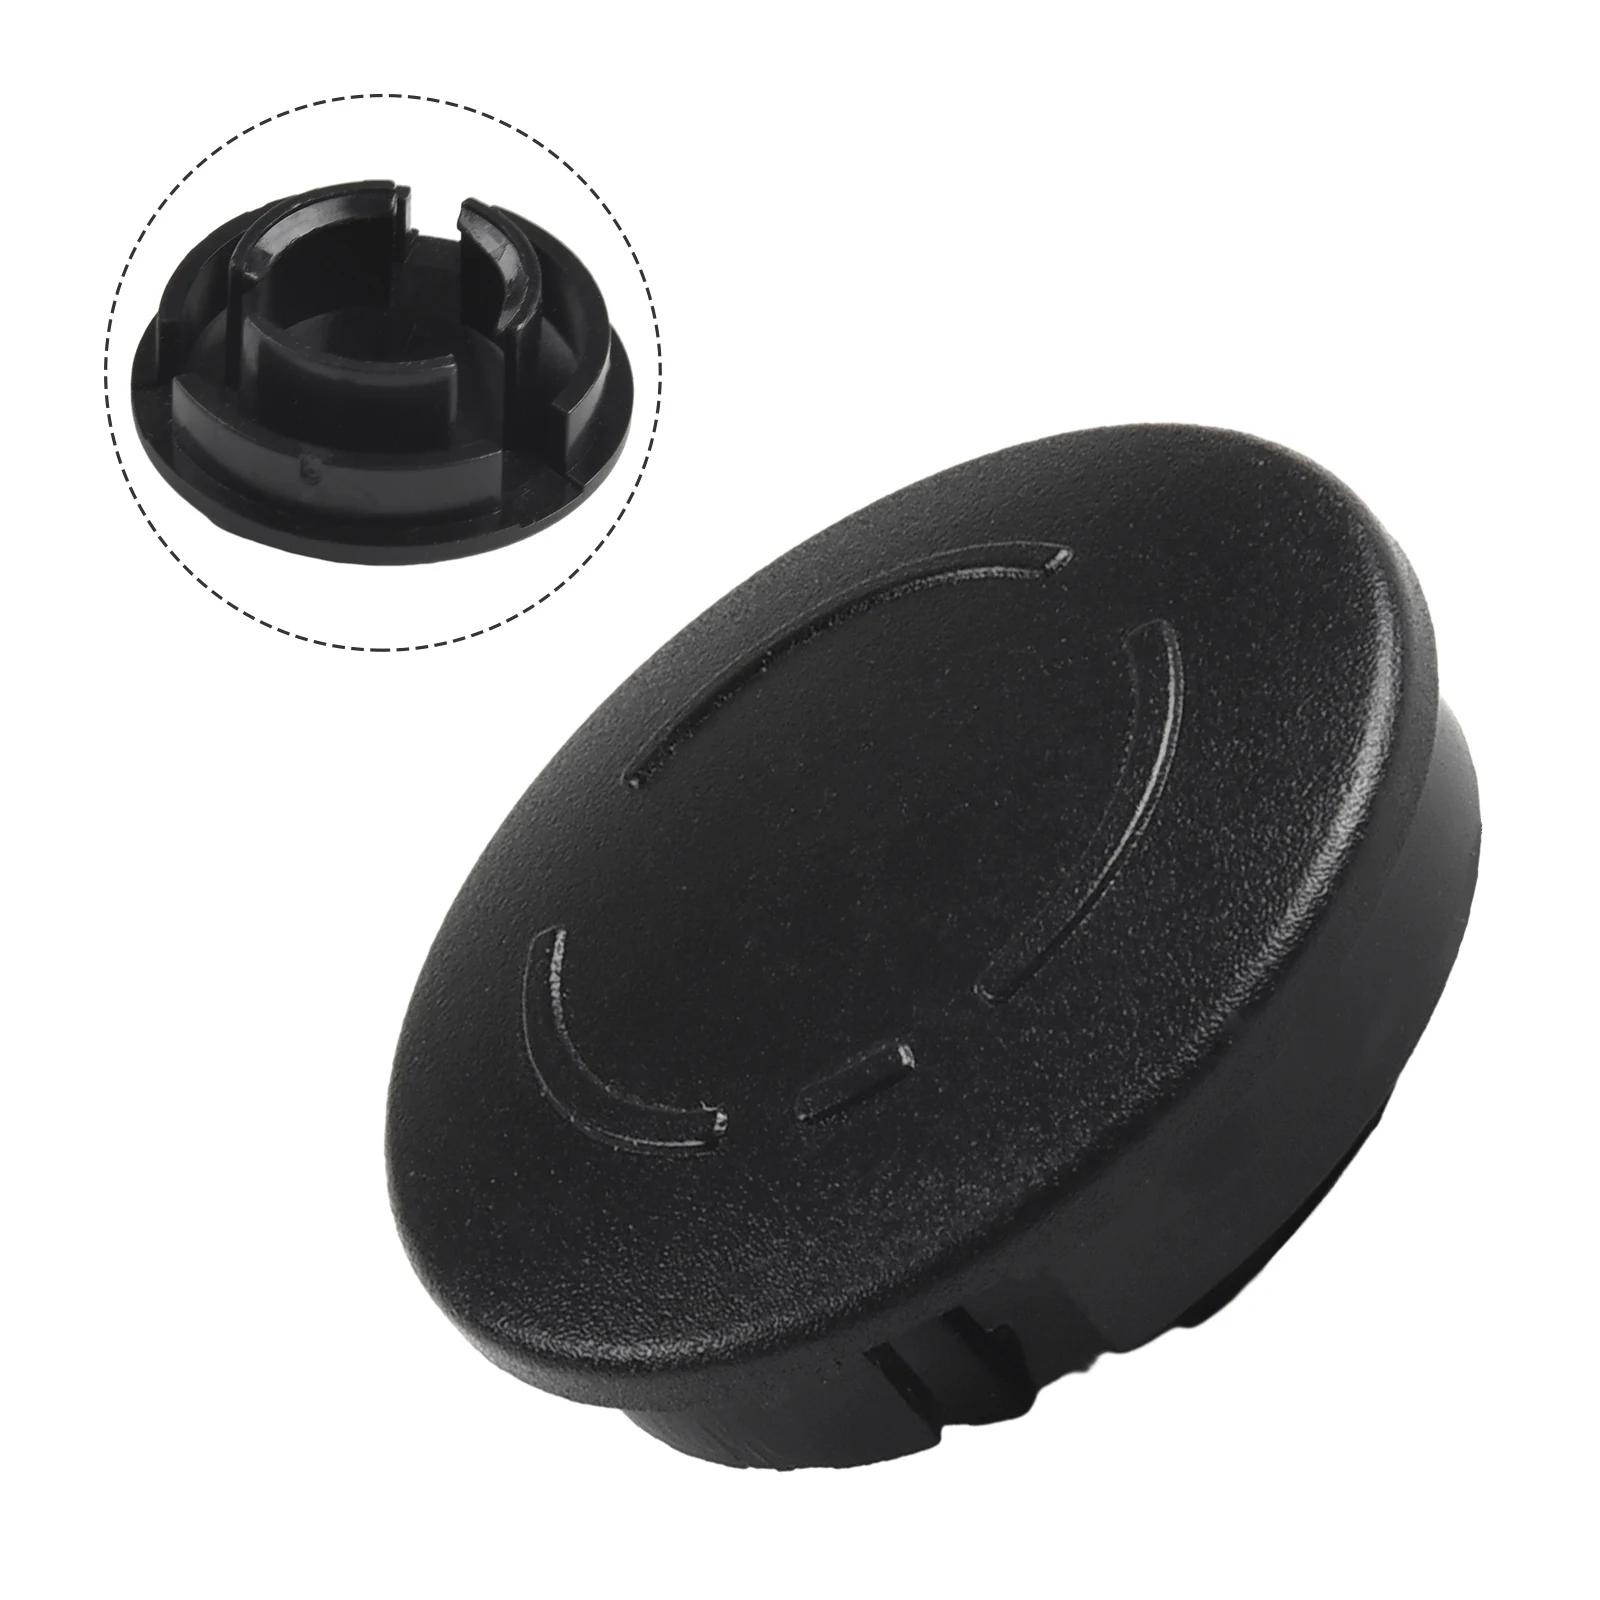 

98390-2T000 Car Windshield Wiper Washer Cap For Kia Adenza 2014-2020 For Carnival 2022 For Forte Koup 2014-2016 For Optima 2011-